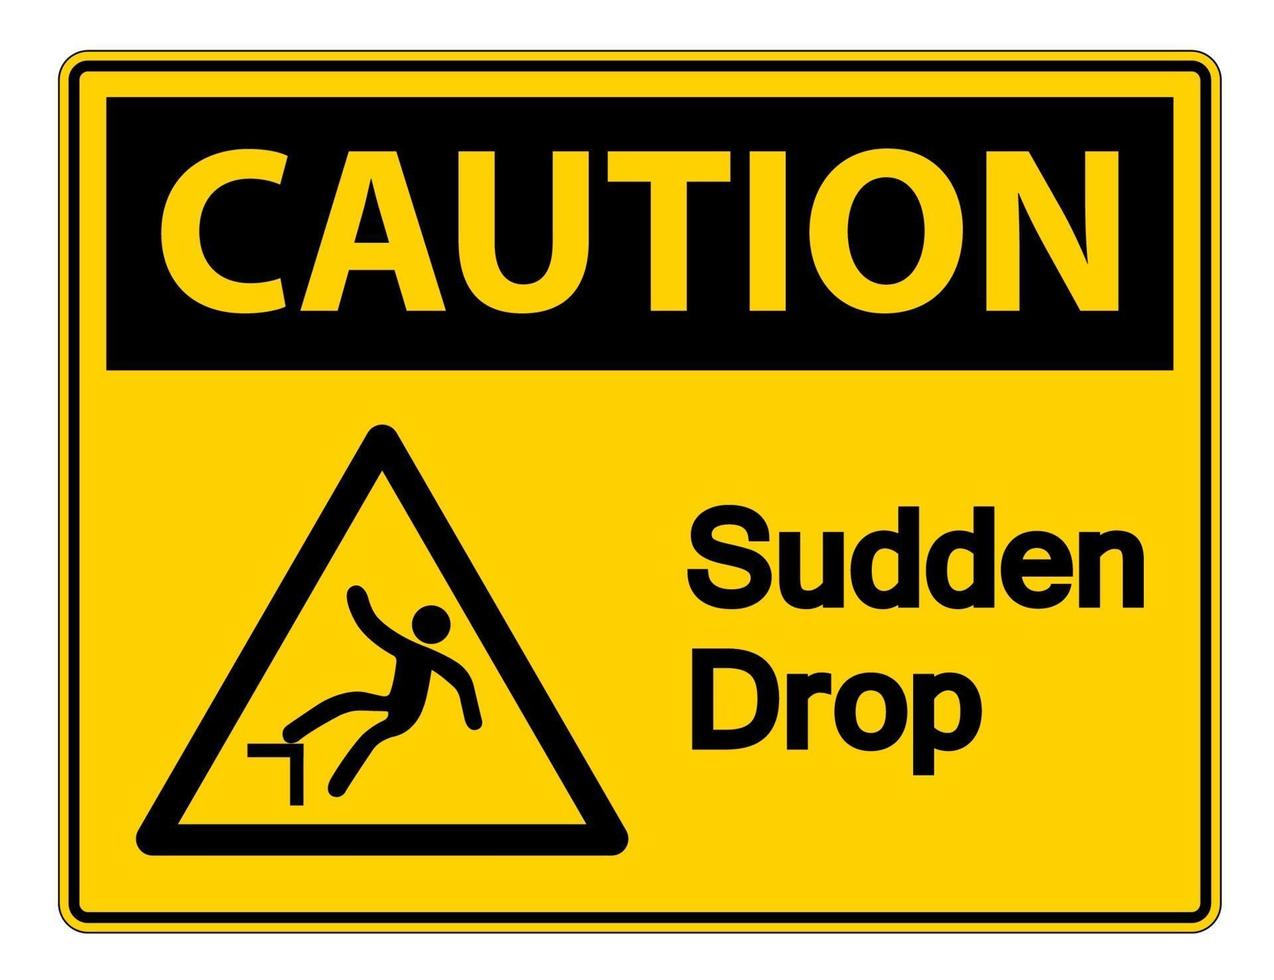 Caution Sudden Drop Symbol Sign On White Background,Vector Illustration vector